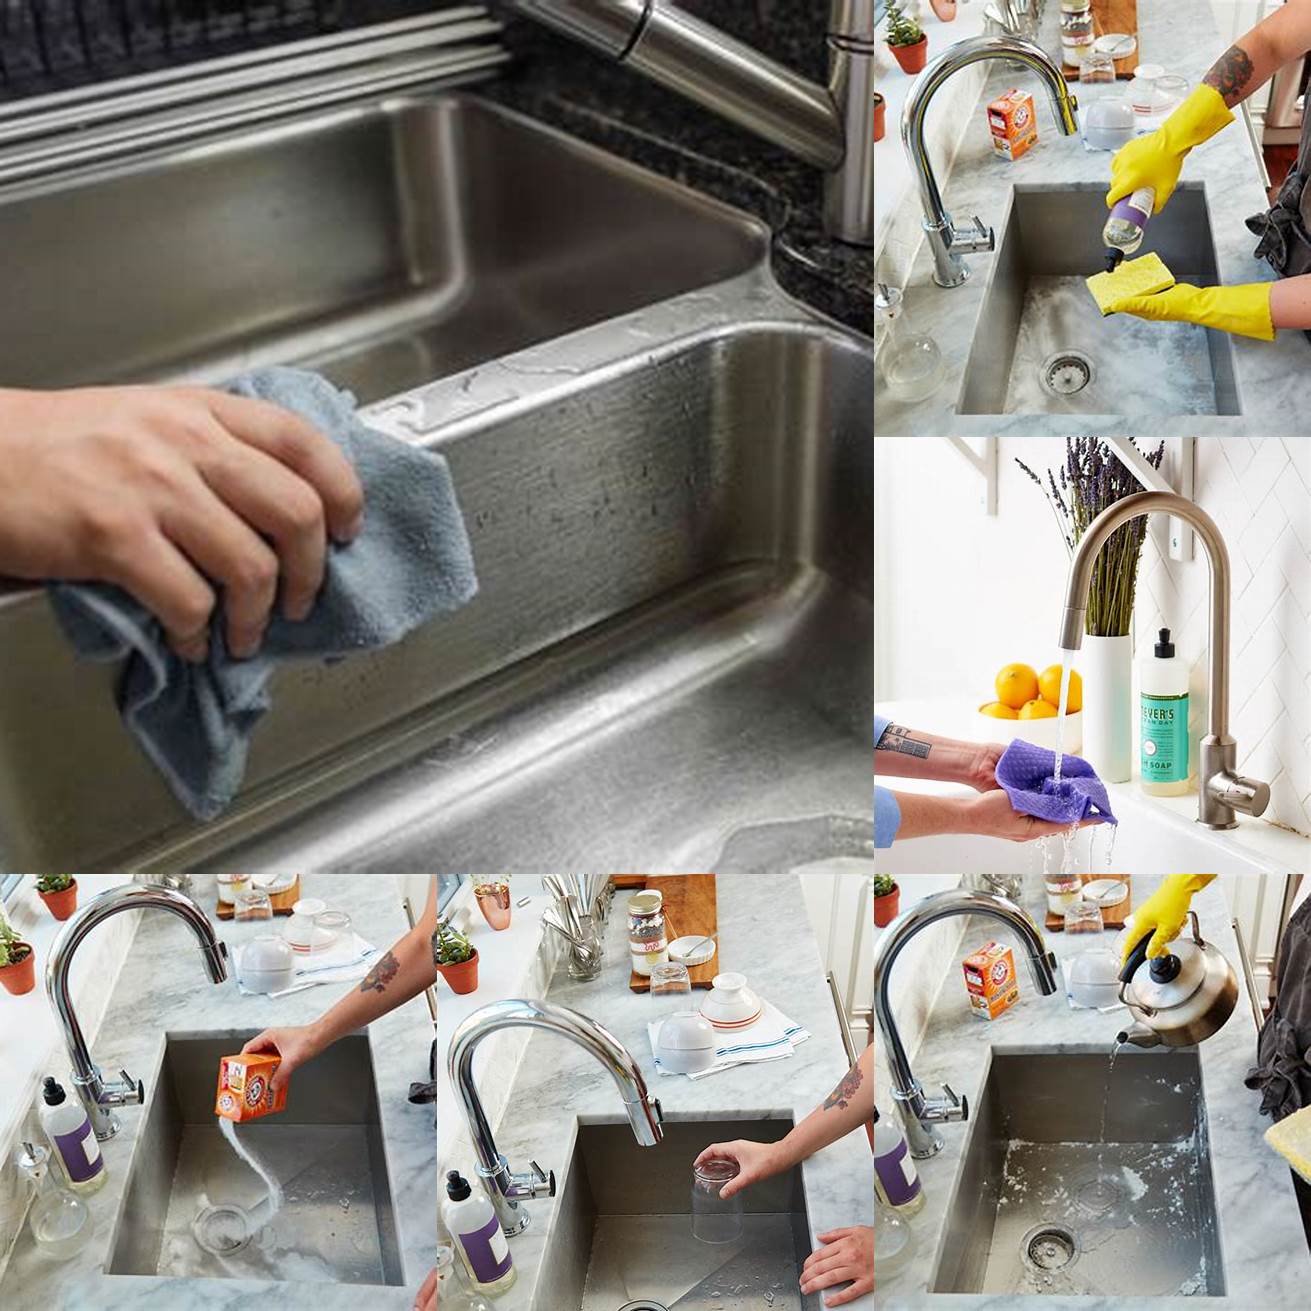 Use a soft sponge or cloth to clean the sink - abrasive materials like steel wool can scratch the surface of the sink